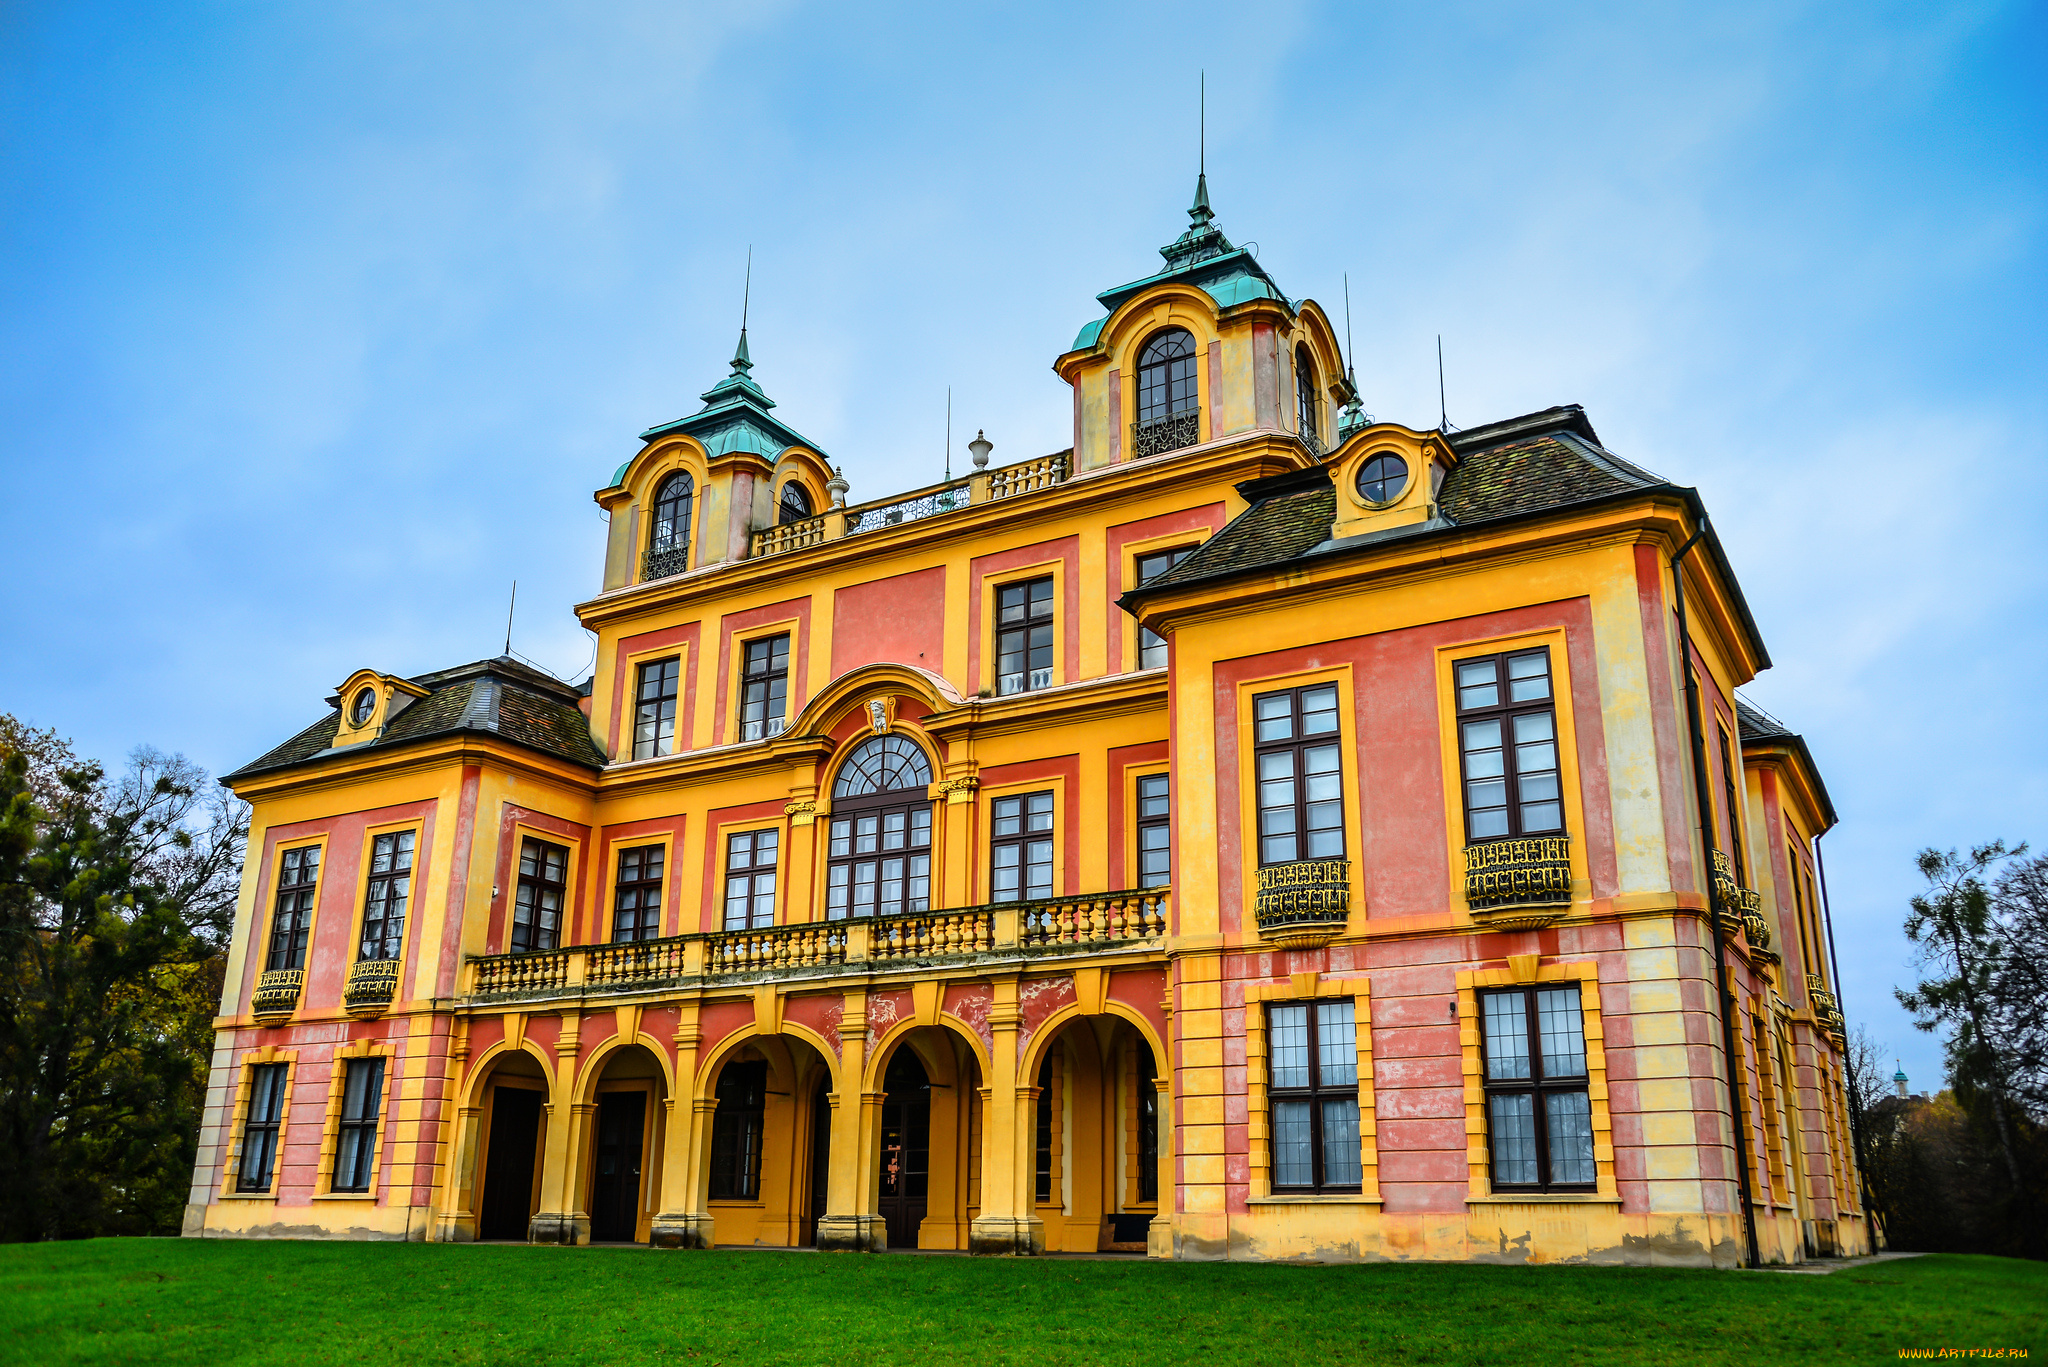 favorite, hunting, and, summer, palace, at, ludwigsburg, palace, -, ludwigsburg, germany, города, -, дворцы, , замки, , крепости, дворец